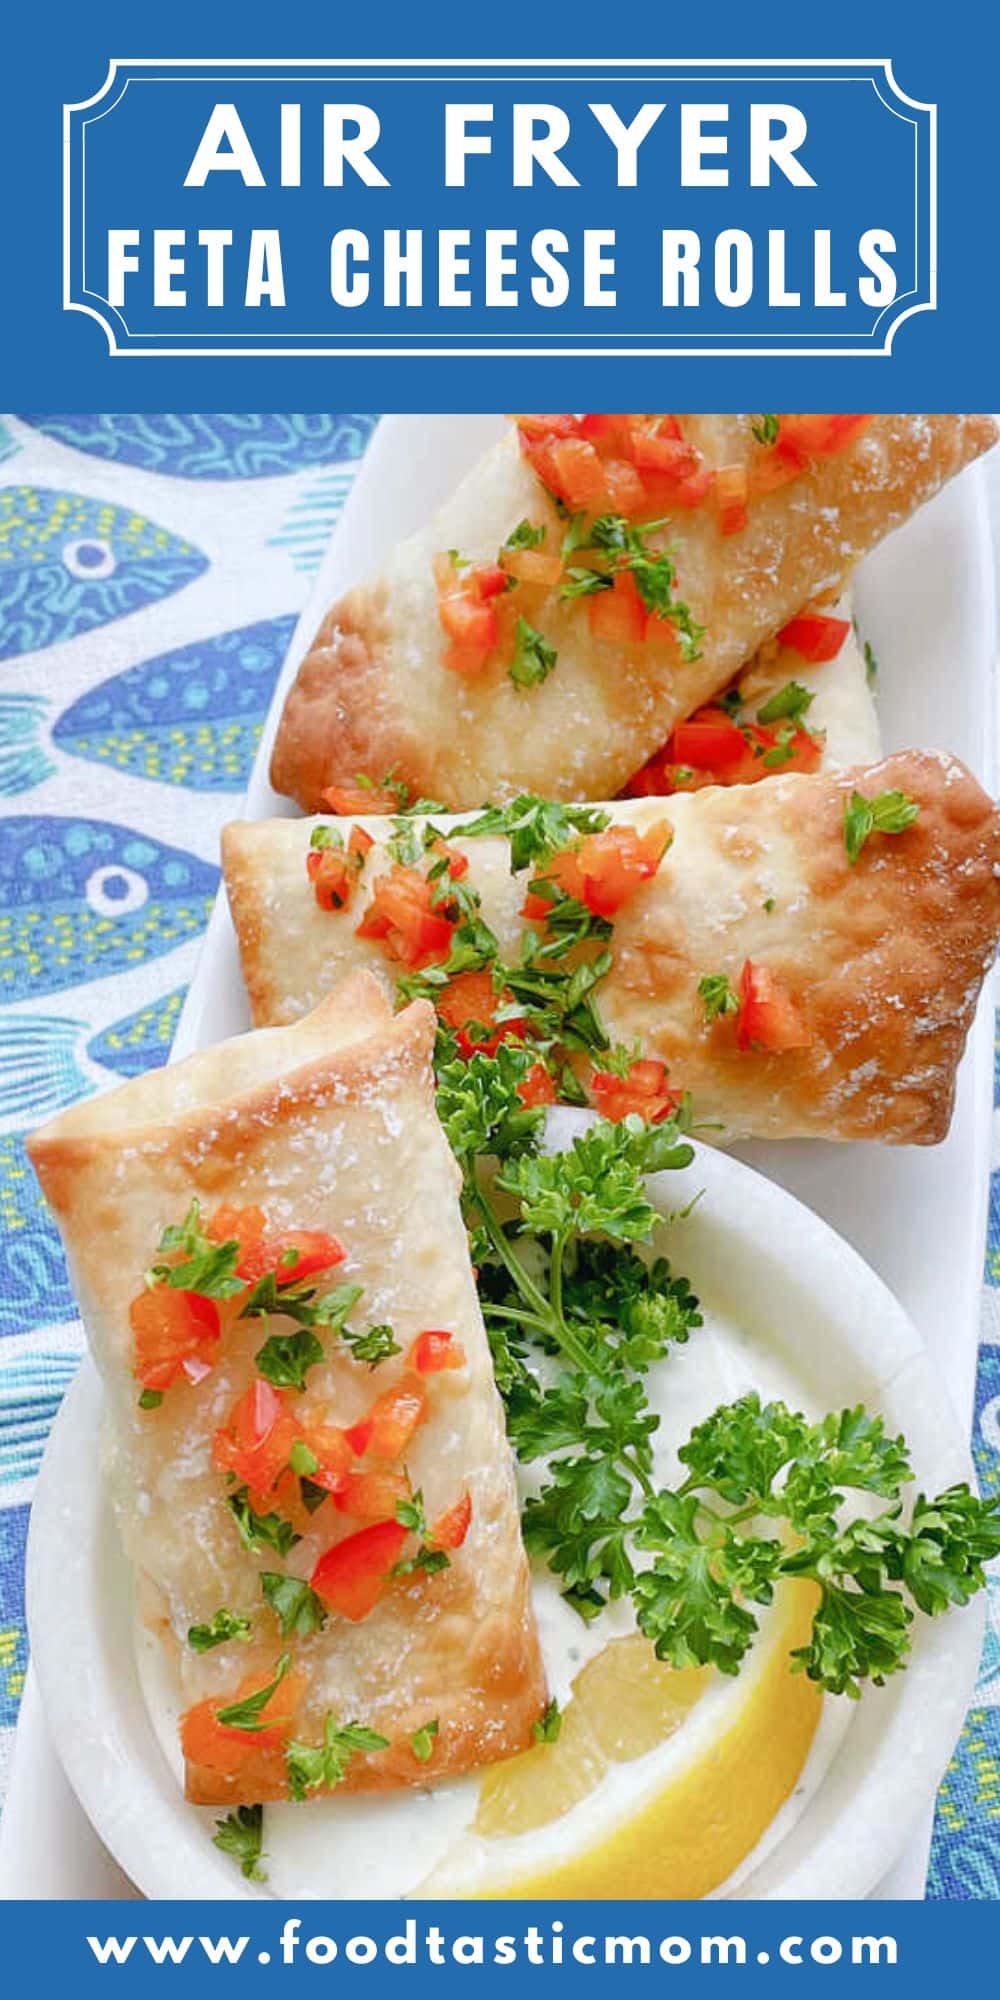 Air Fryer Feta Cheese Rolls are delightfully crispy egg rolls wrappers with red pepper, feta cheese, herbs and spices. Simply delicious. via @foodtasticmom